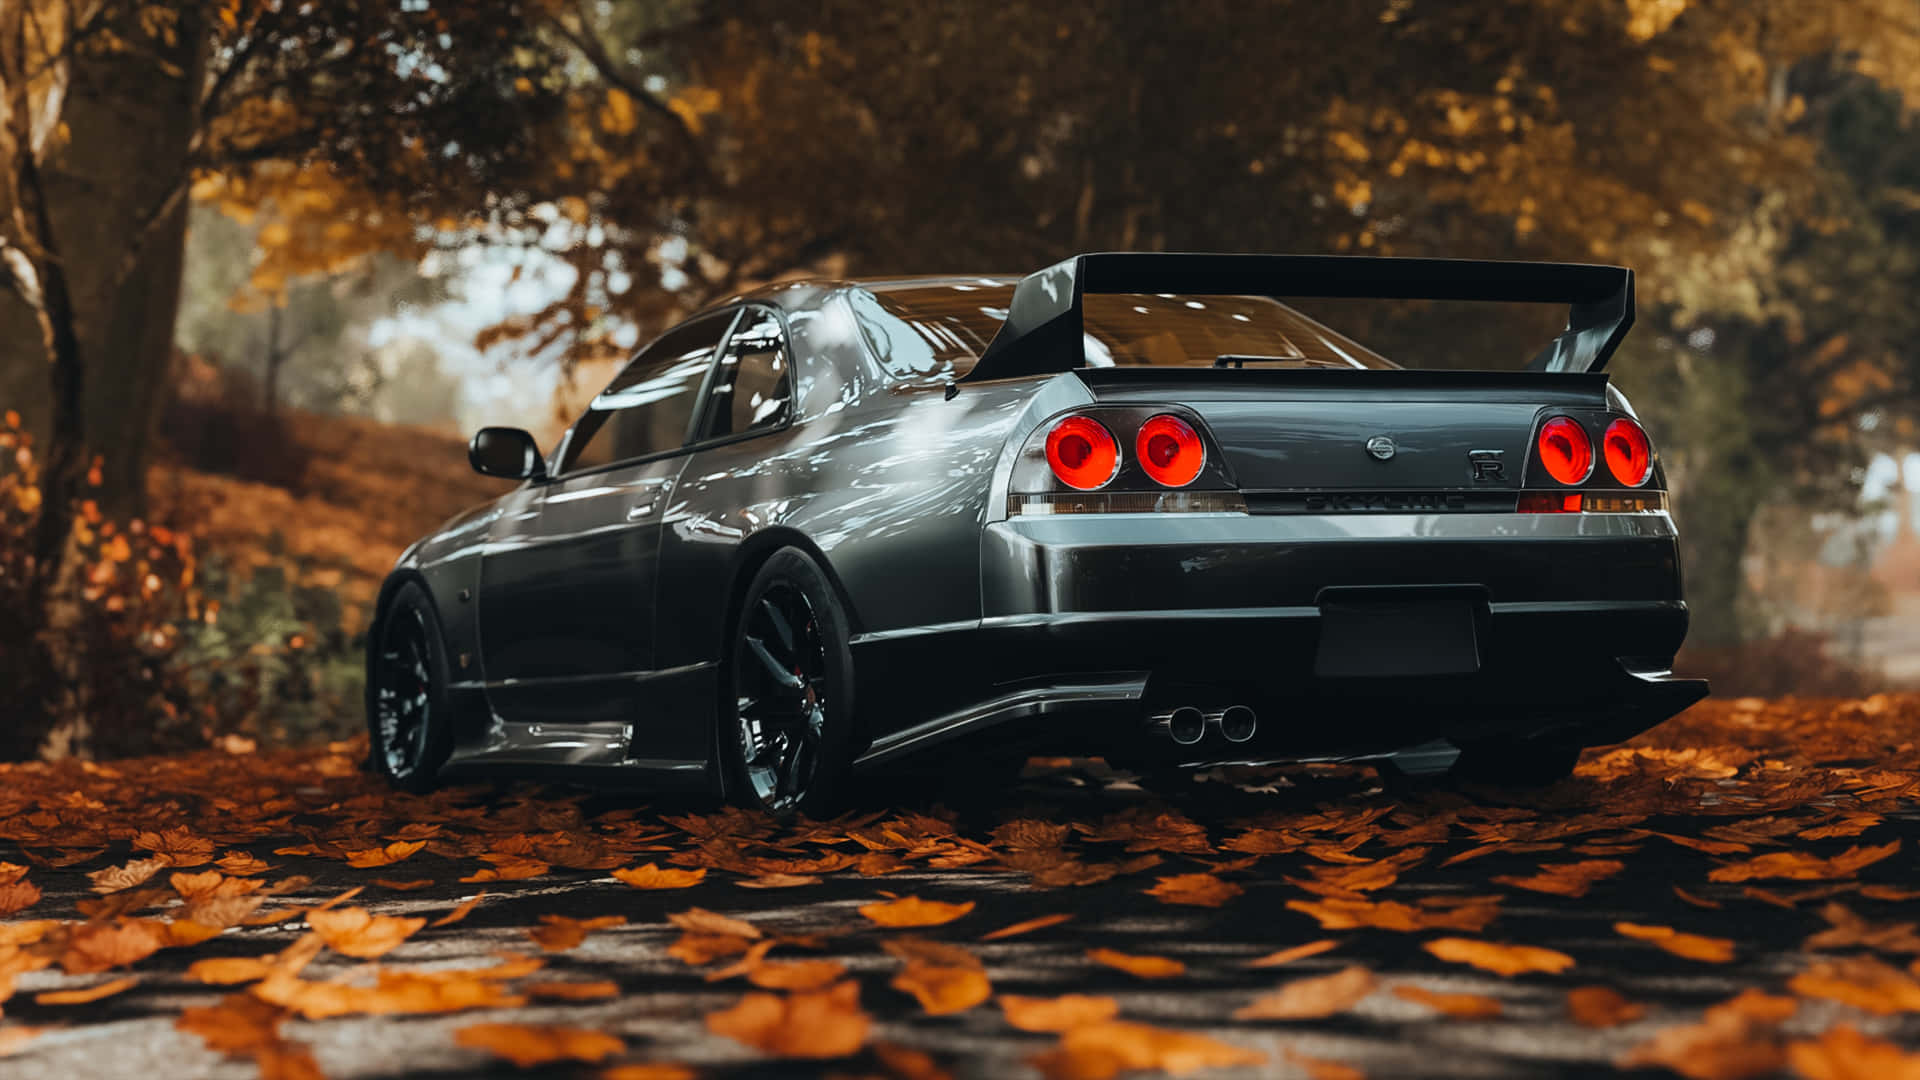 A Black Car Parked In The Fall Leaves